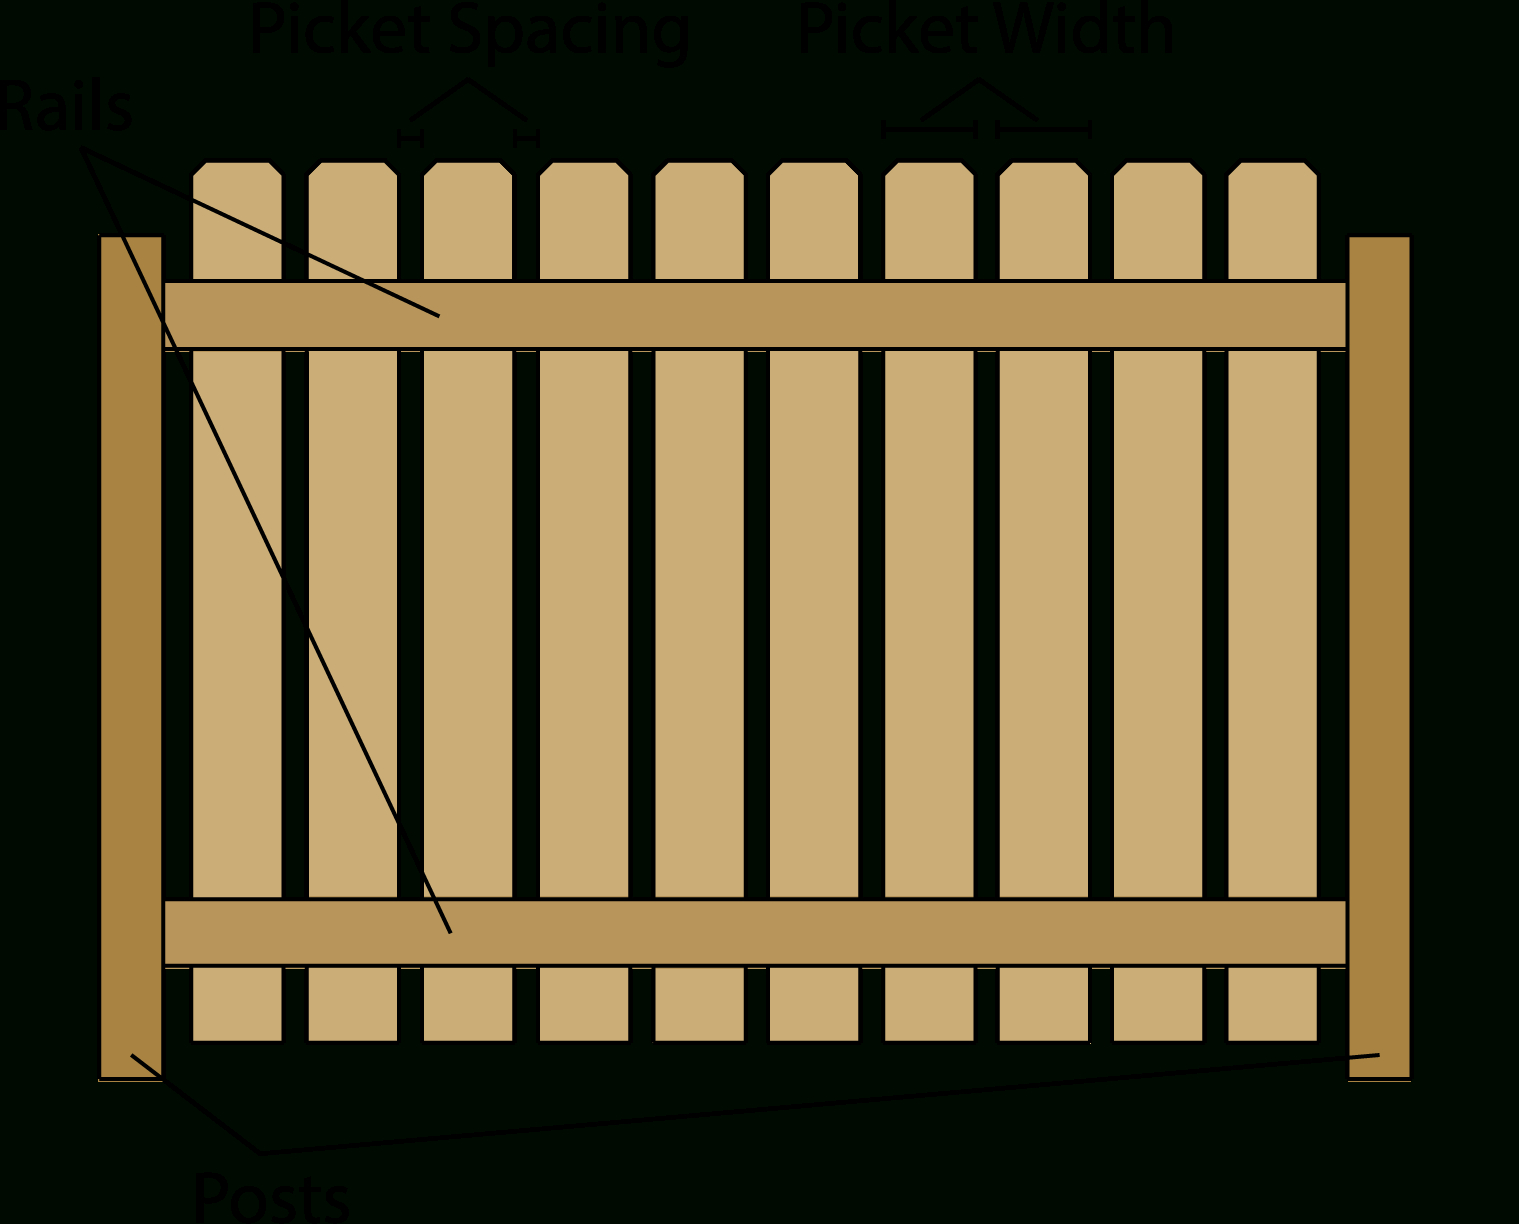 Wood Fence Estimate Spreadsheet Pertaining To Fence Calculator  Estimate Wood Fencing Materials And Post Centers